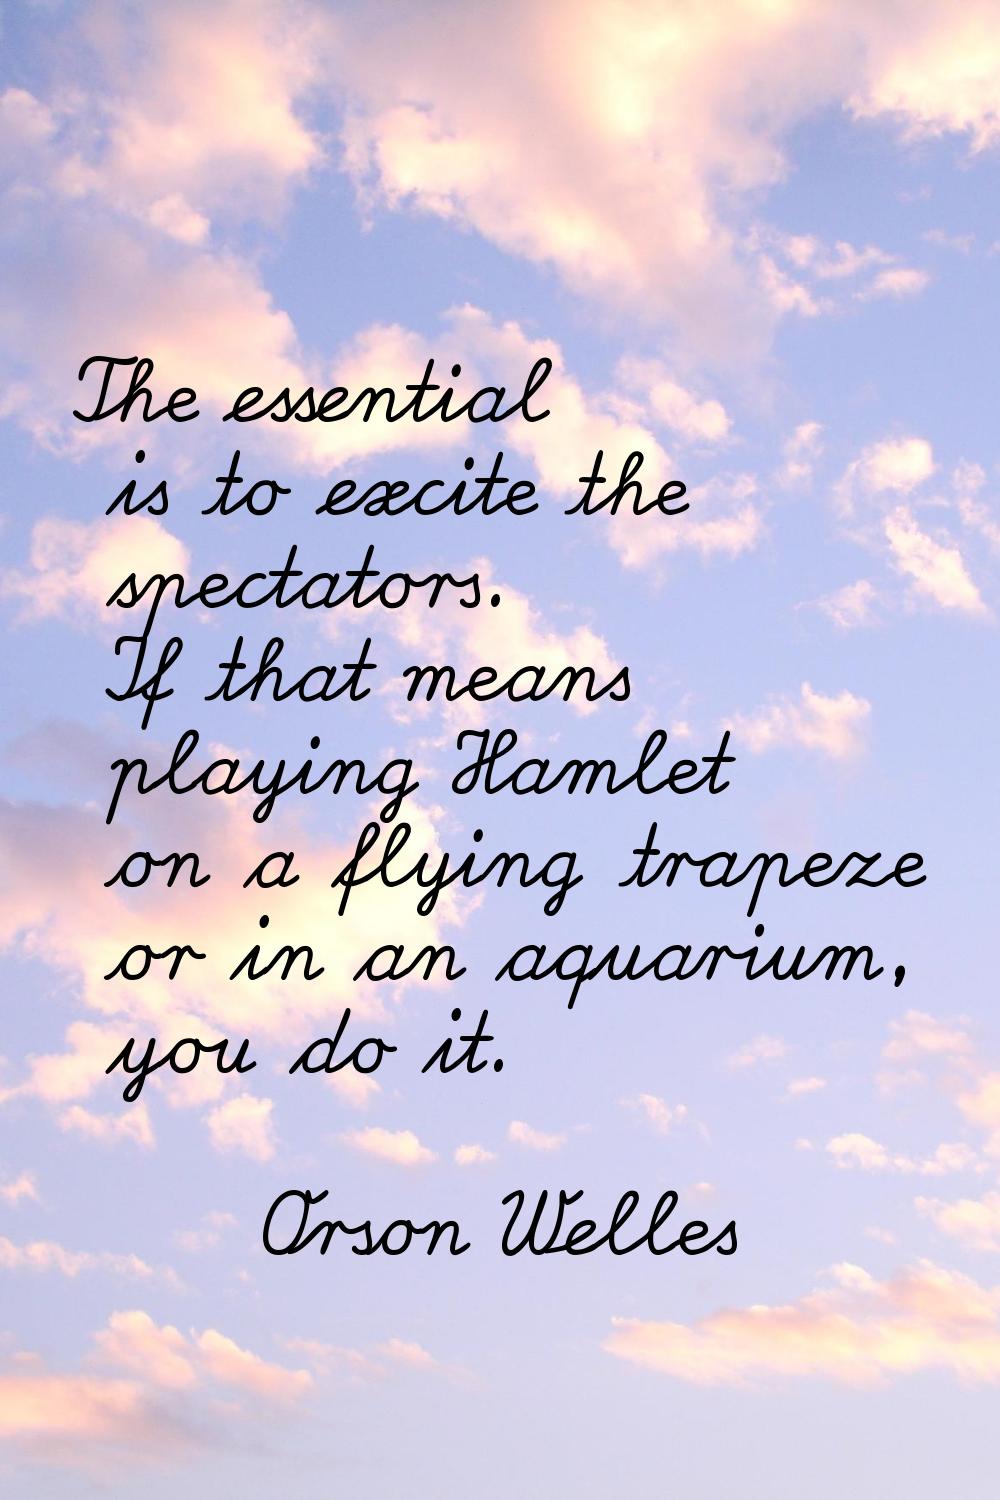 The essential is to excite the spectators. If that means playing Hamlet on a flying trapeze or in a